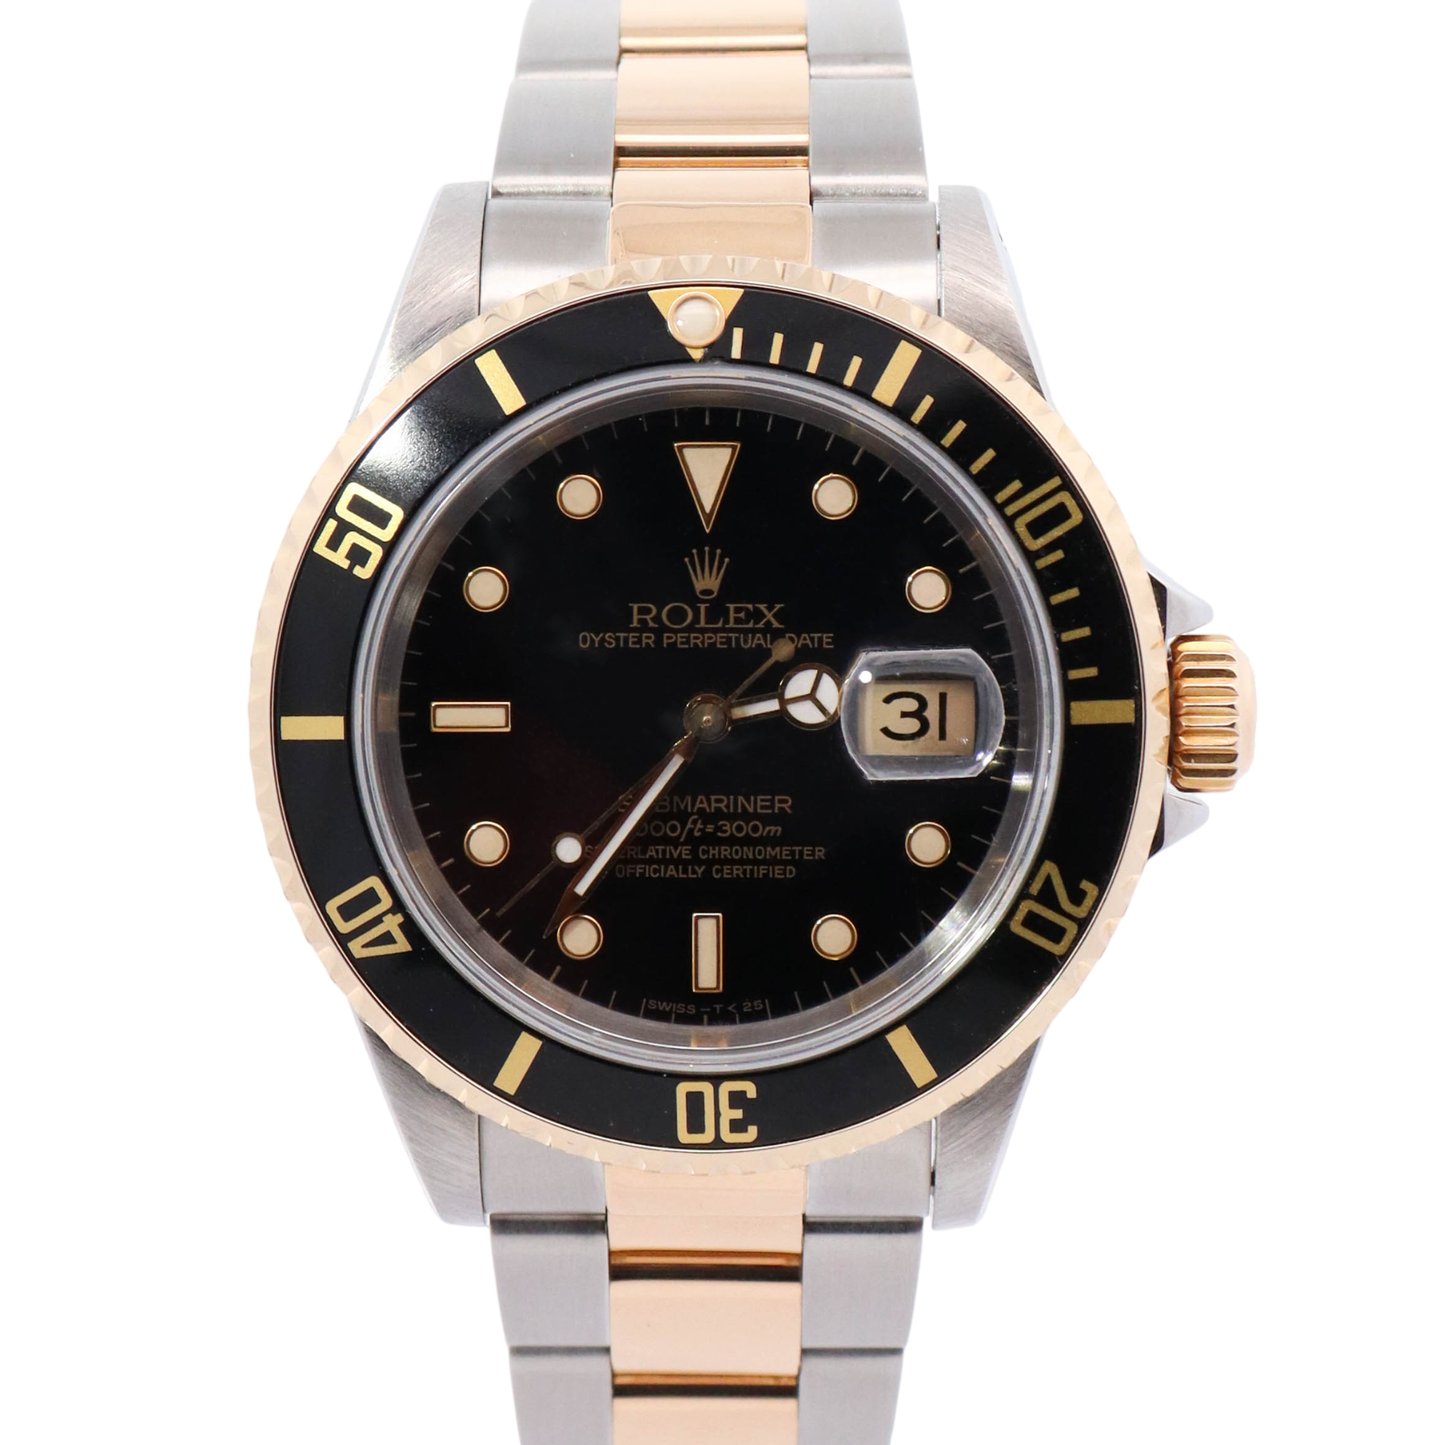 Rolex Submariner 40mm Yellow Gold & Stainless Steel Black Dot Dial Watch Reference# 16613 - Happy Jewelers Fine Jewelry Lifetime Warranty